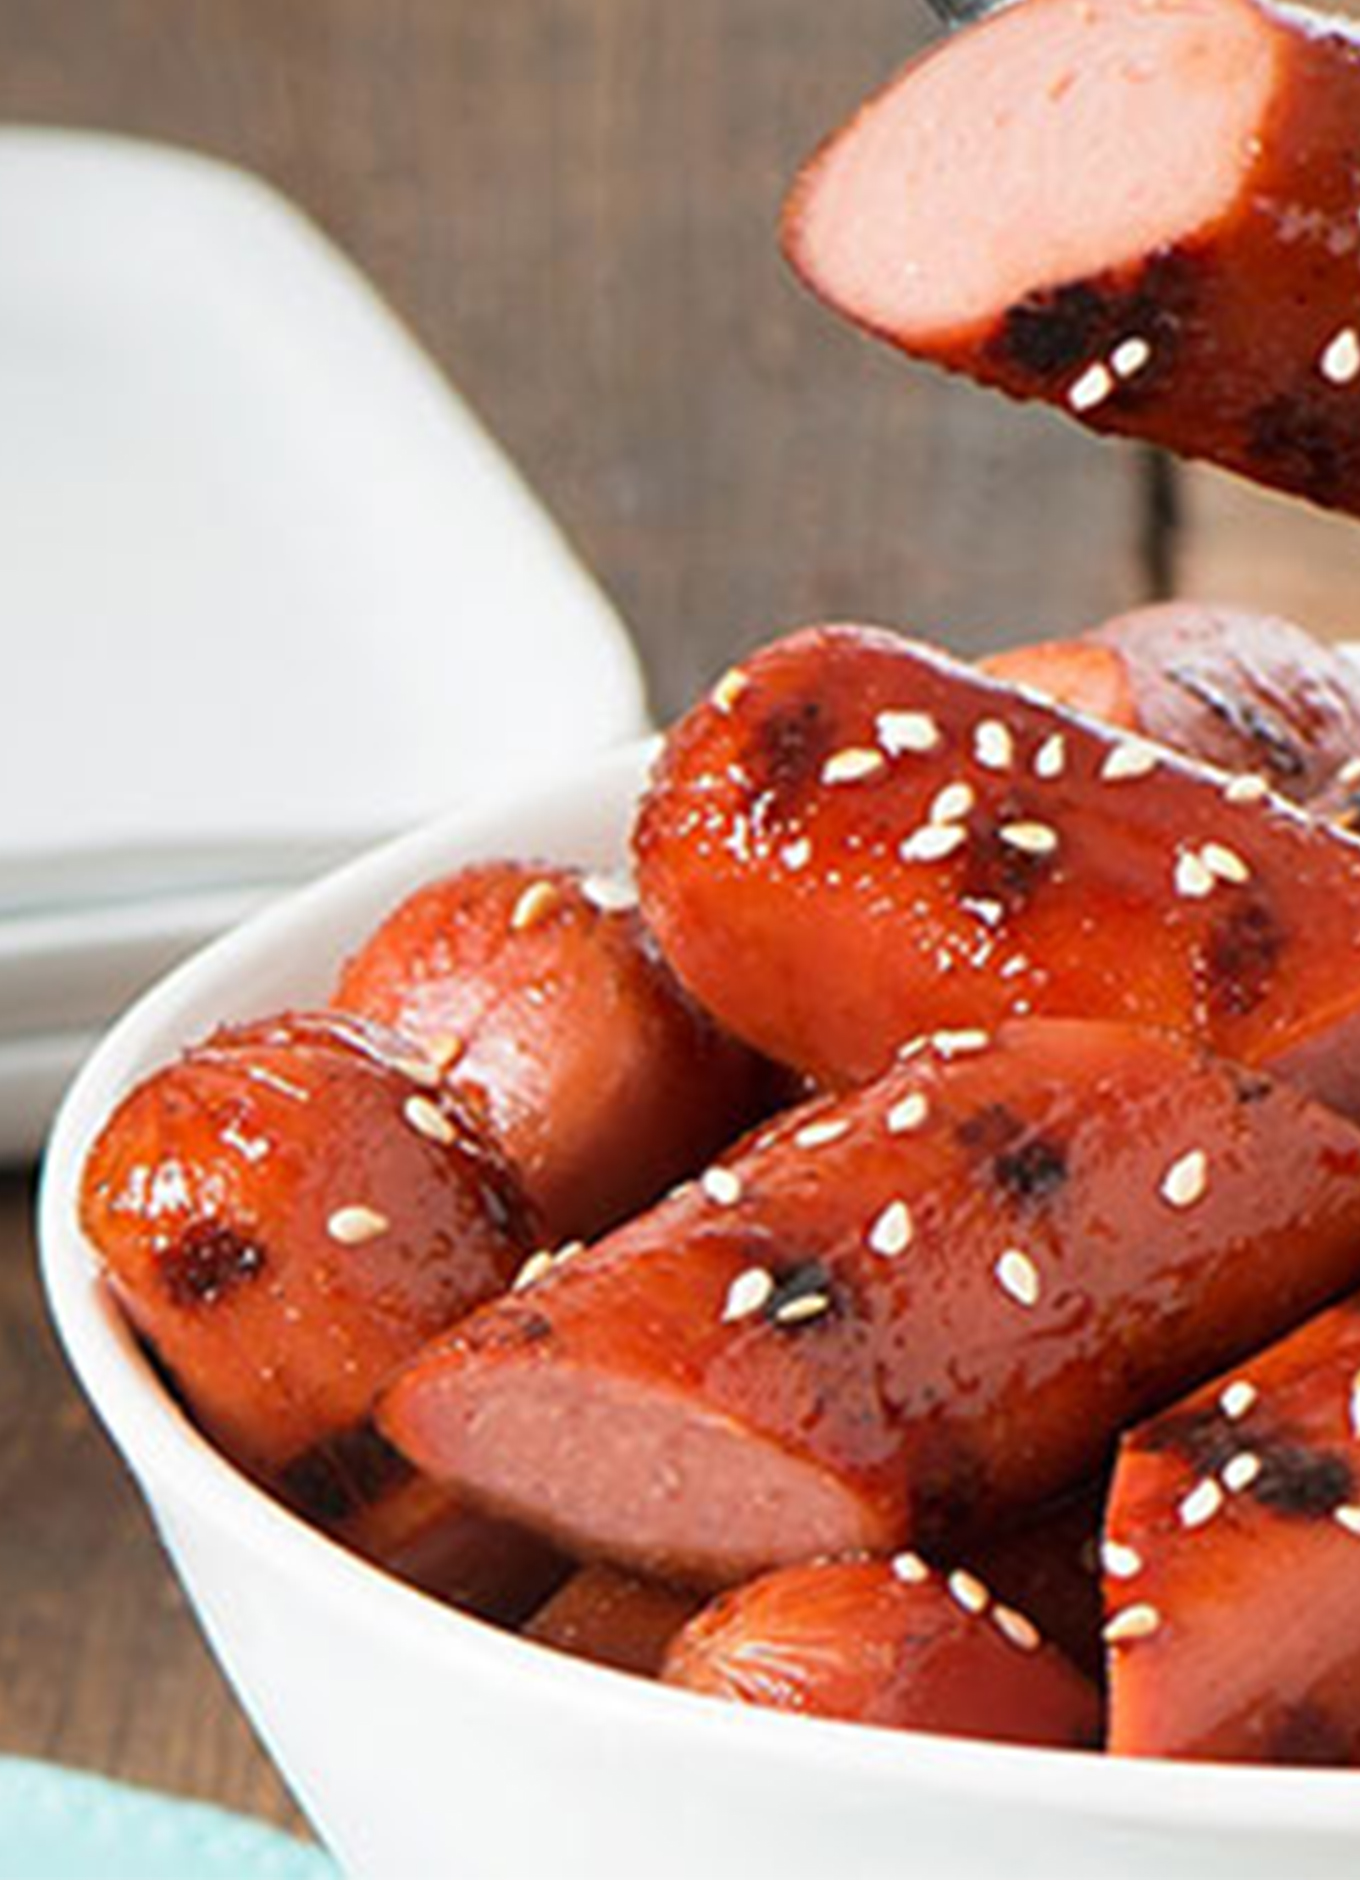 A bowl of grilled Sweet & Spicy Hot Dog bites topped with sesame seeds